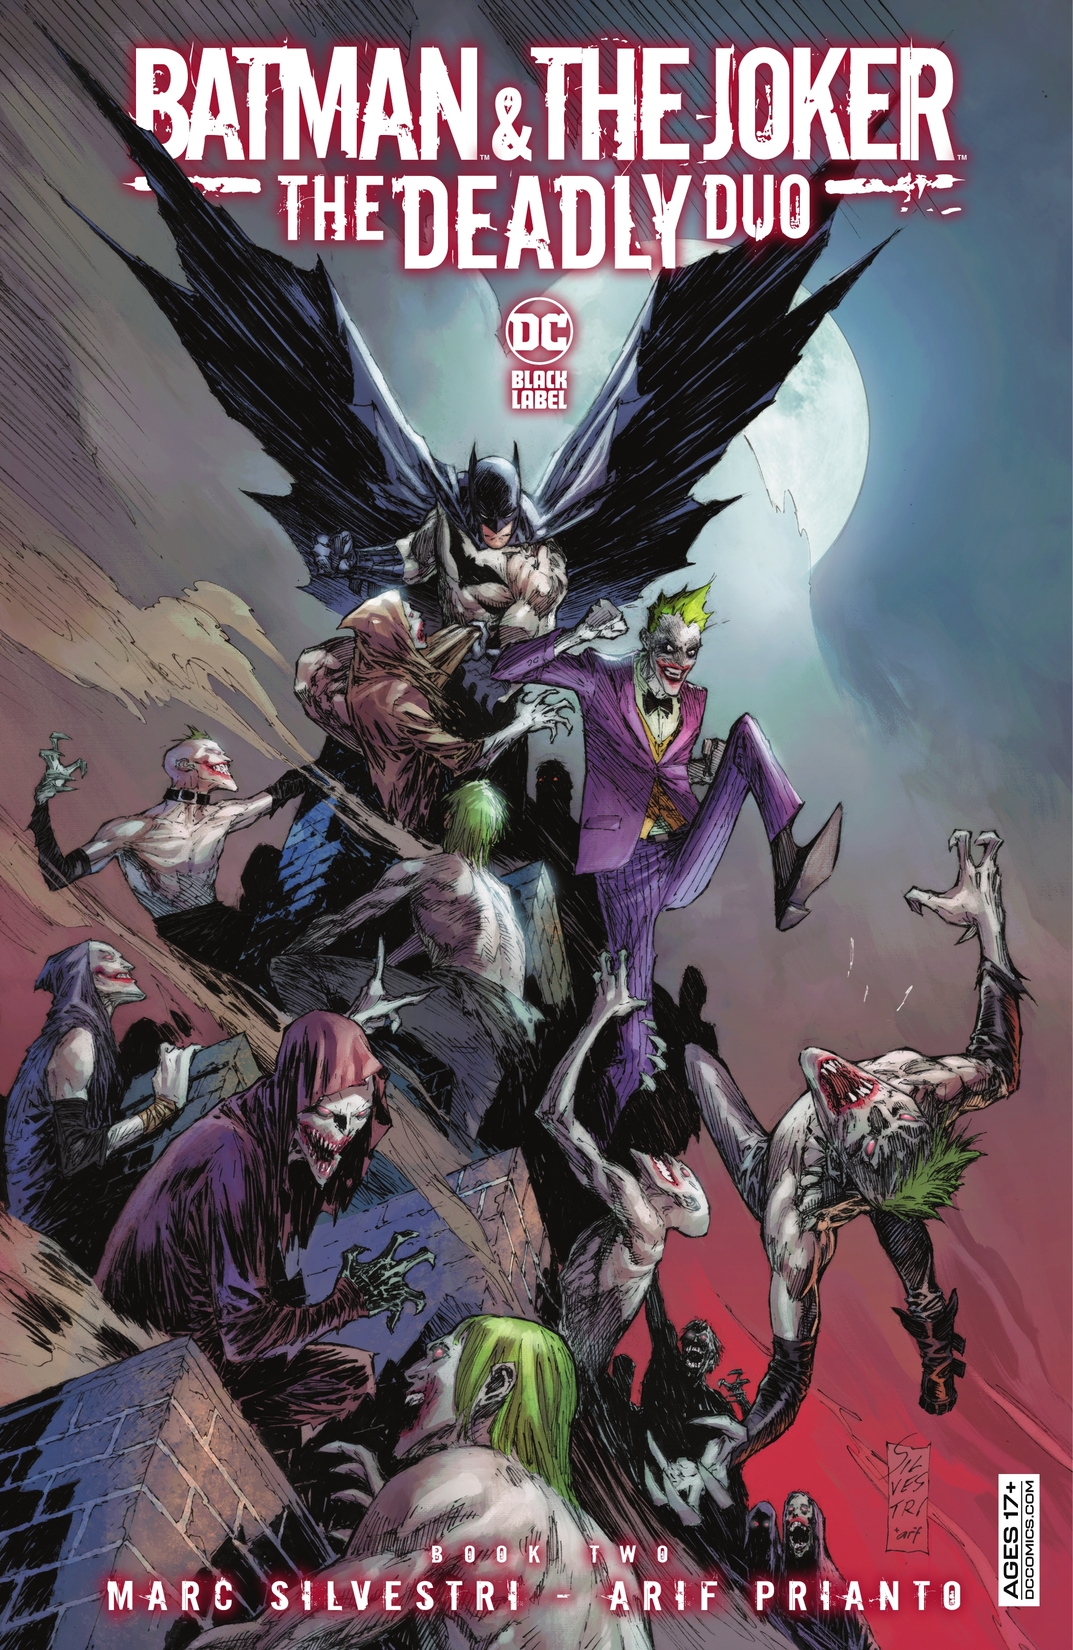 Batman & The Joker: The Deadly Duo #2 preview images